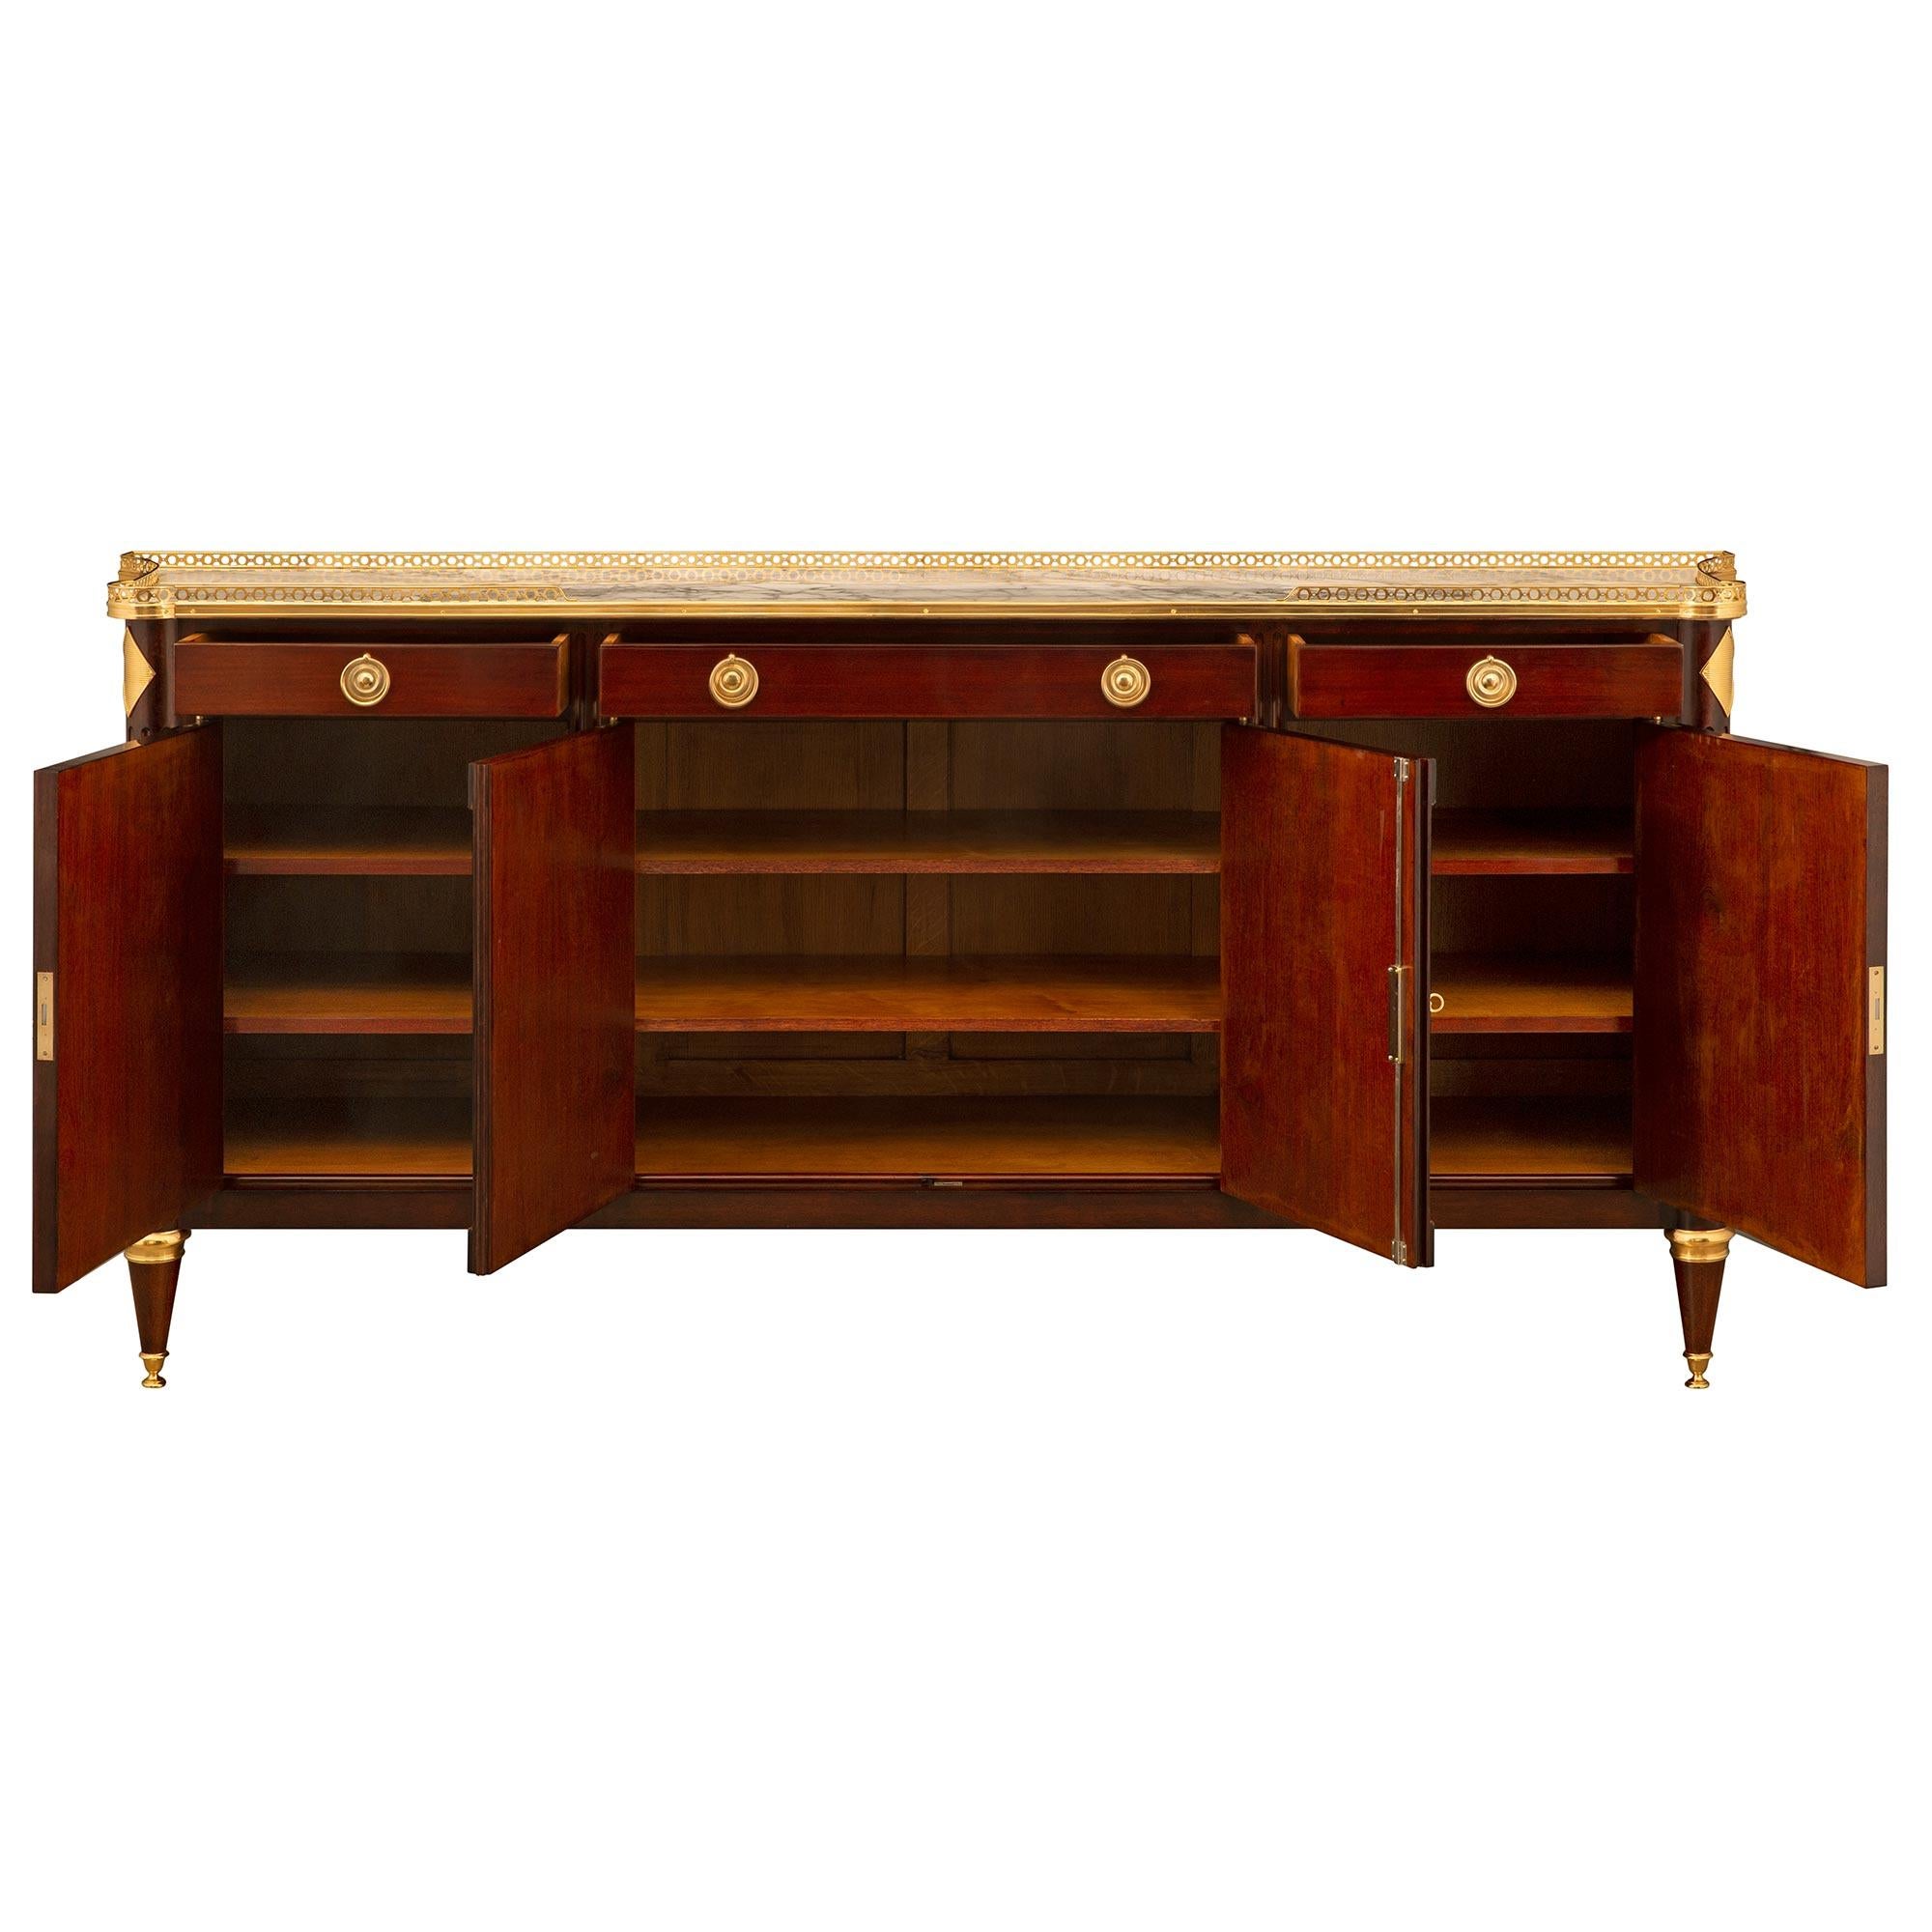 A stunning and extremely elegant French 19th century Louis XVI st. Mahogany, ormolu, and Arabescato marble buffet. The four door three drawer buffet is raised by beautiful topie shaped tapered legs with fine ormolu feet and wrap around mottled top